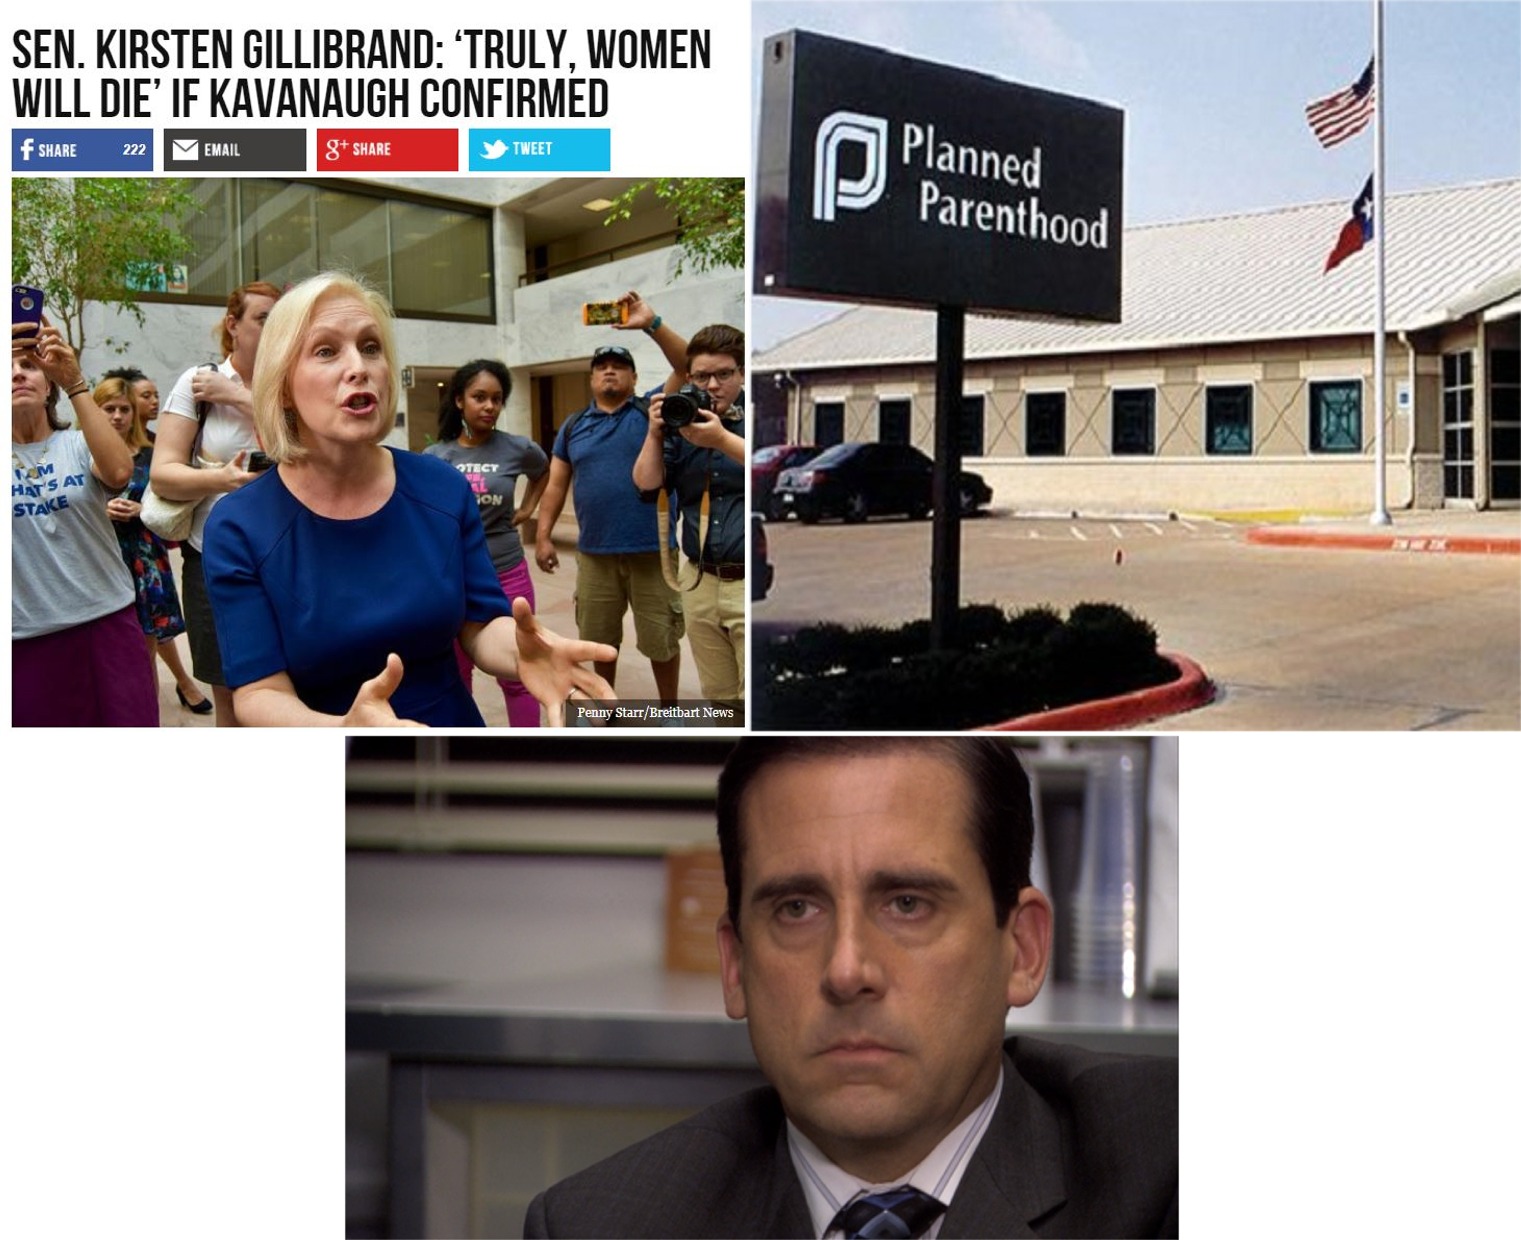 Sen. Kirsten Gillibrand Truly, Women Will Dieif Kavanaugh Confirmed f 222 Email g Tweet Planned Parenthood Hat'S At Stake Penny StarrBreitbart News